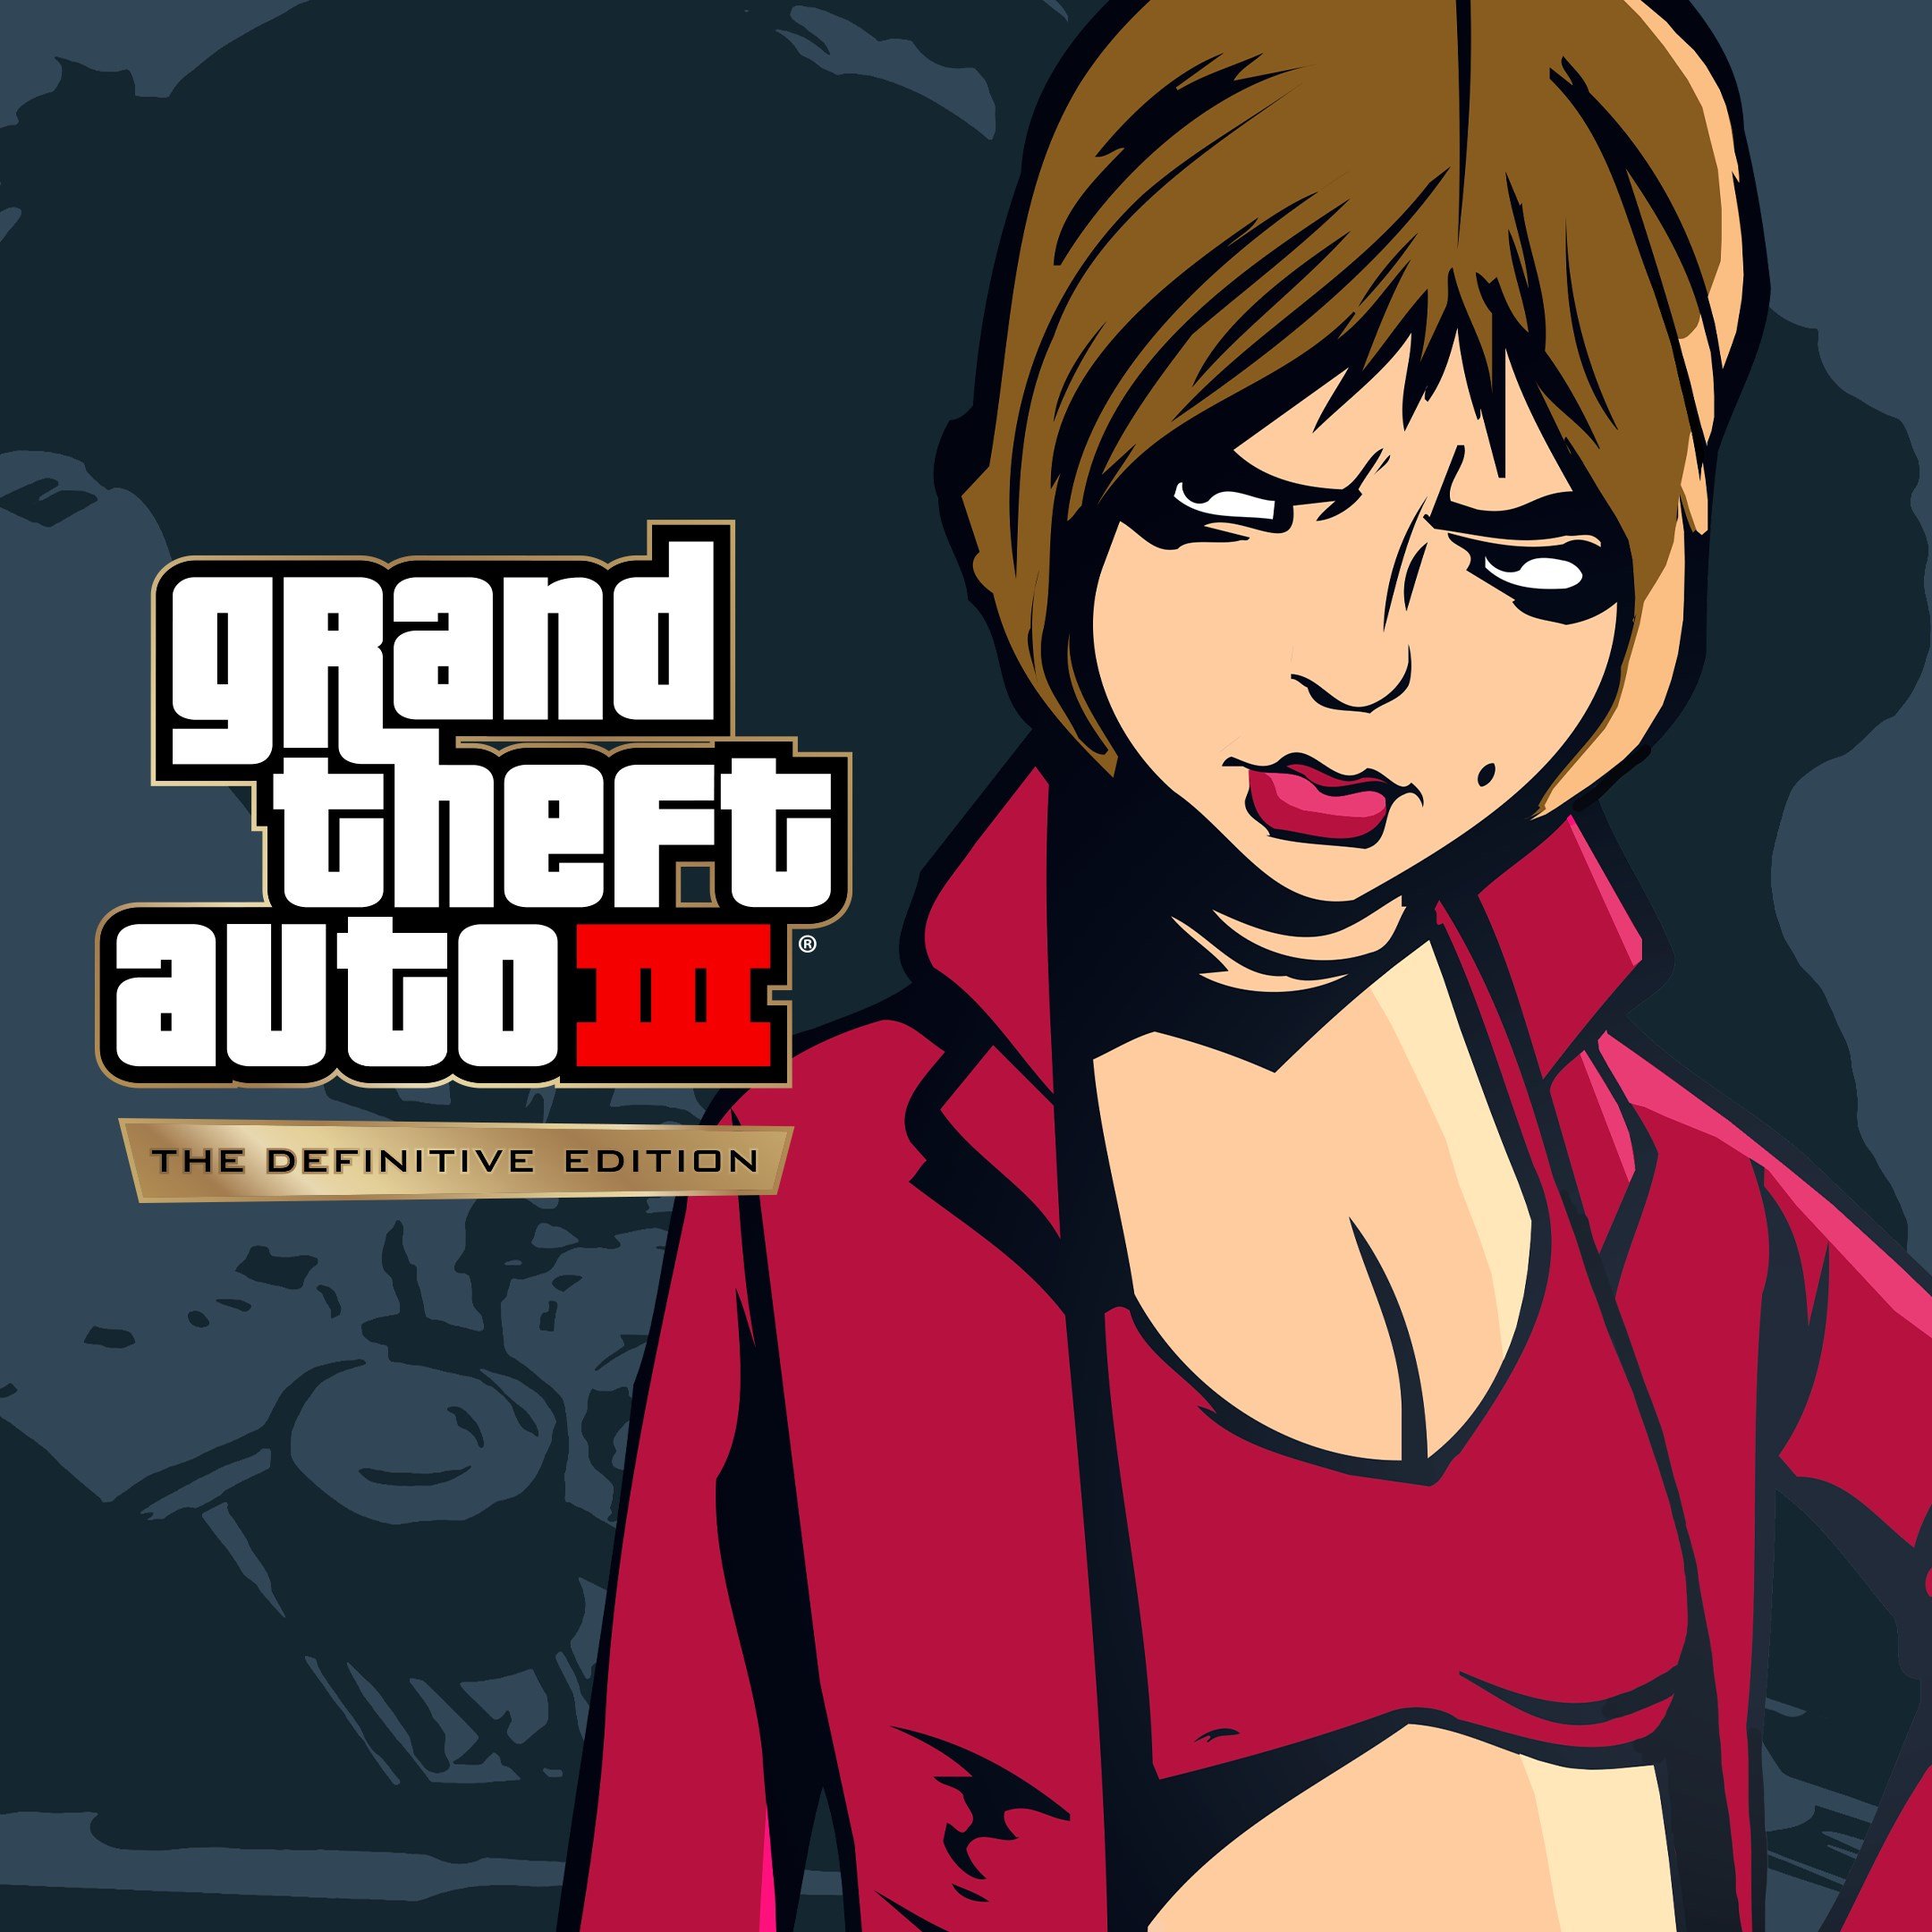 Boxart for Grand Theft Auto III – The Definitive Edition